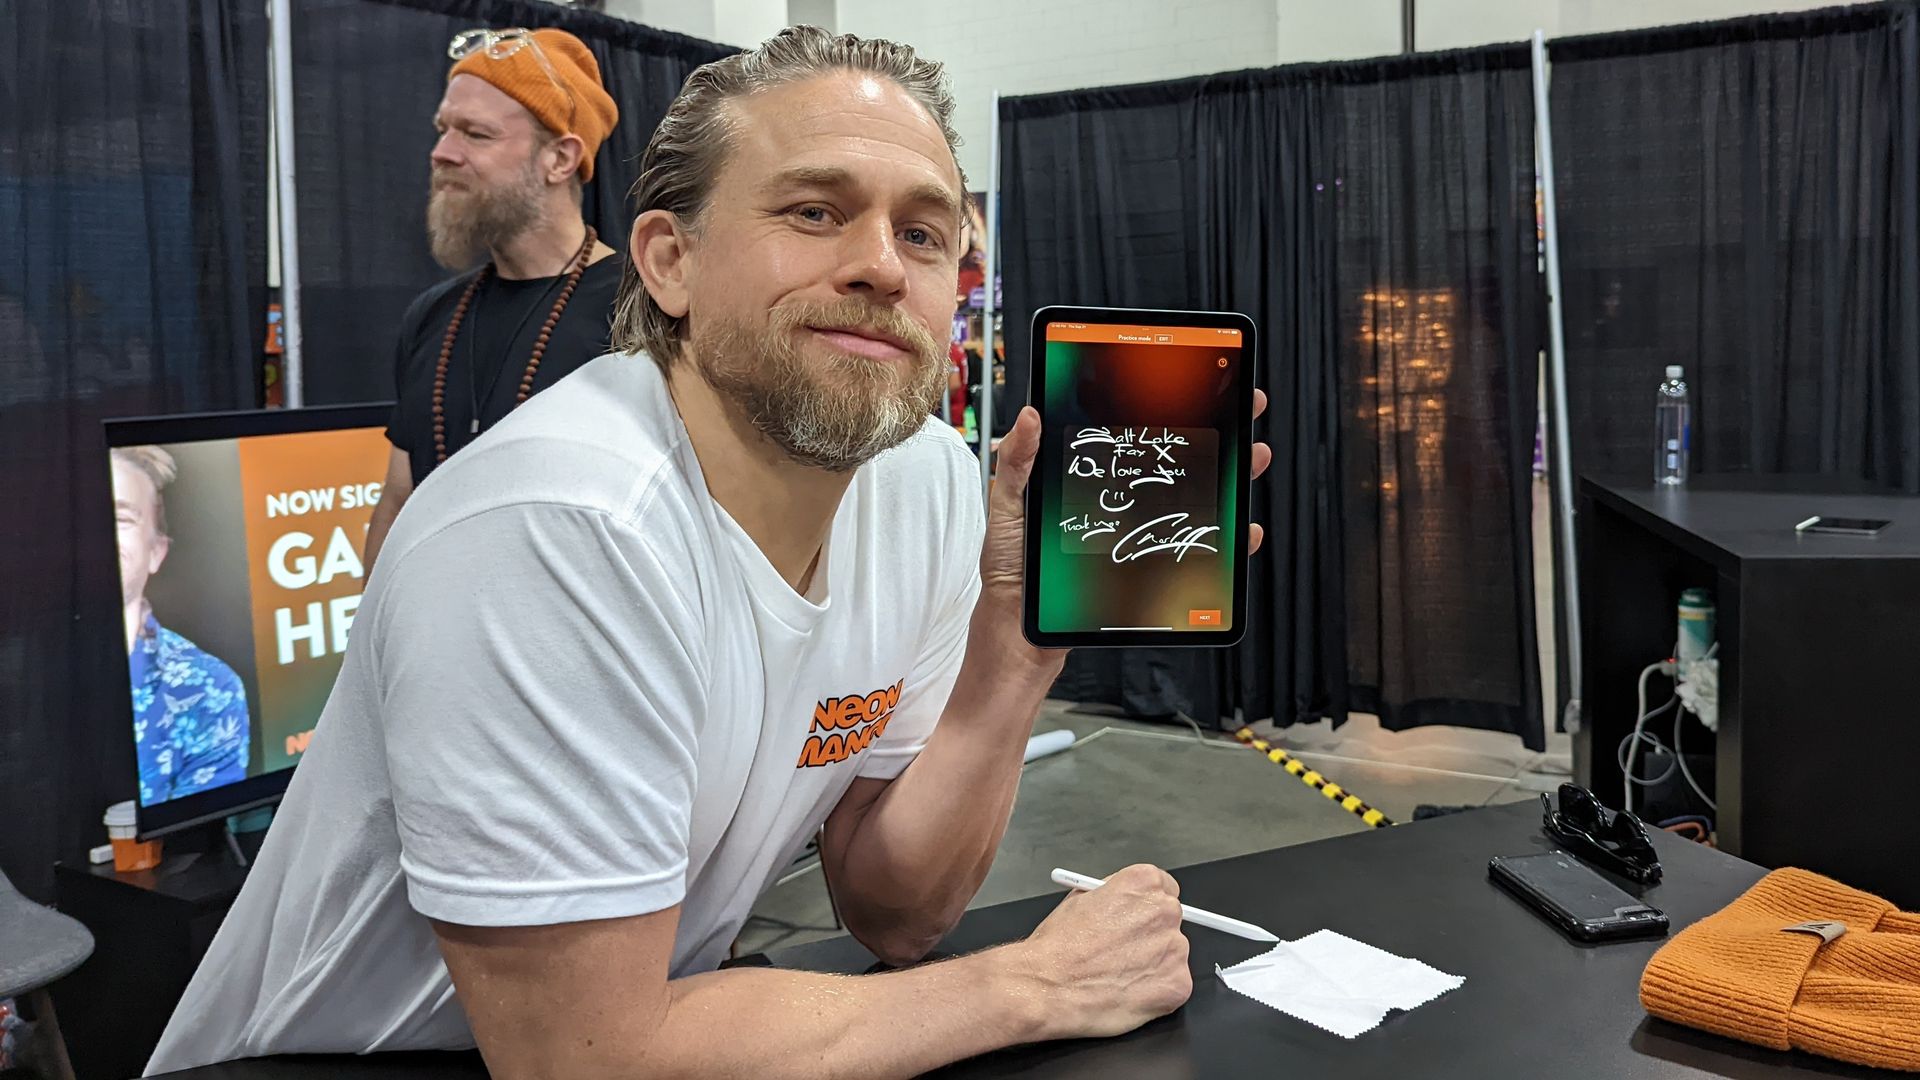 Actor Charlie Hunnam displays a digital autograph via his new company Neon Mango at FanX in Salt Lake City while his costar and cofounder Ryan Hurst walks in the background. Photo: Erin Alberty/Axios